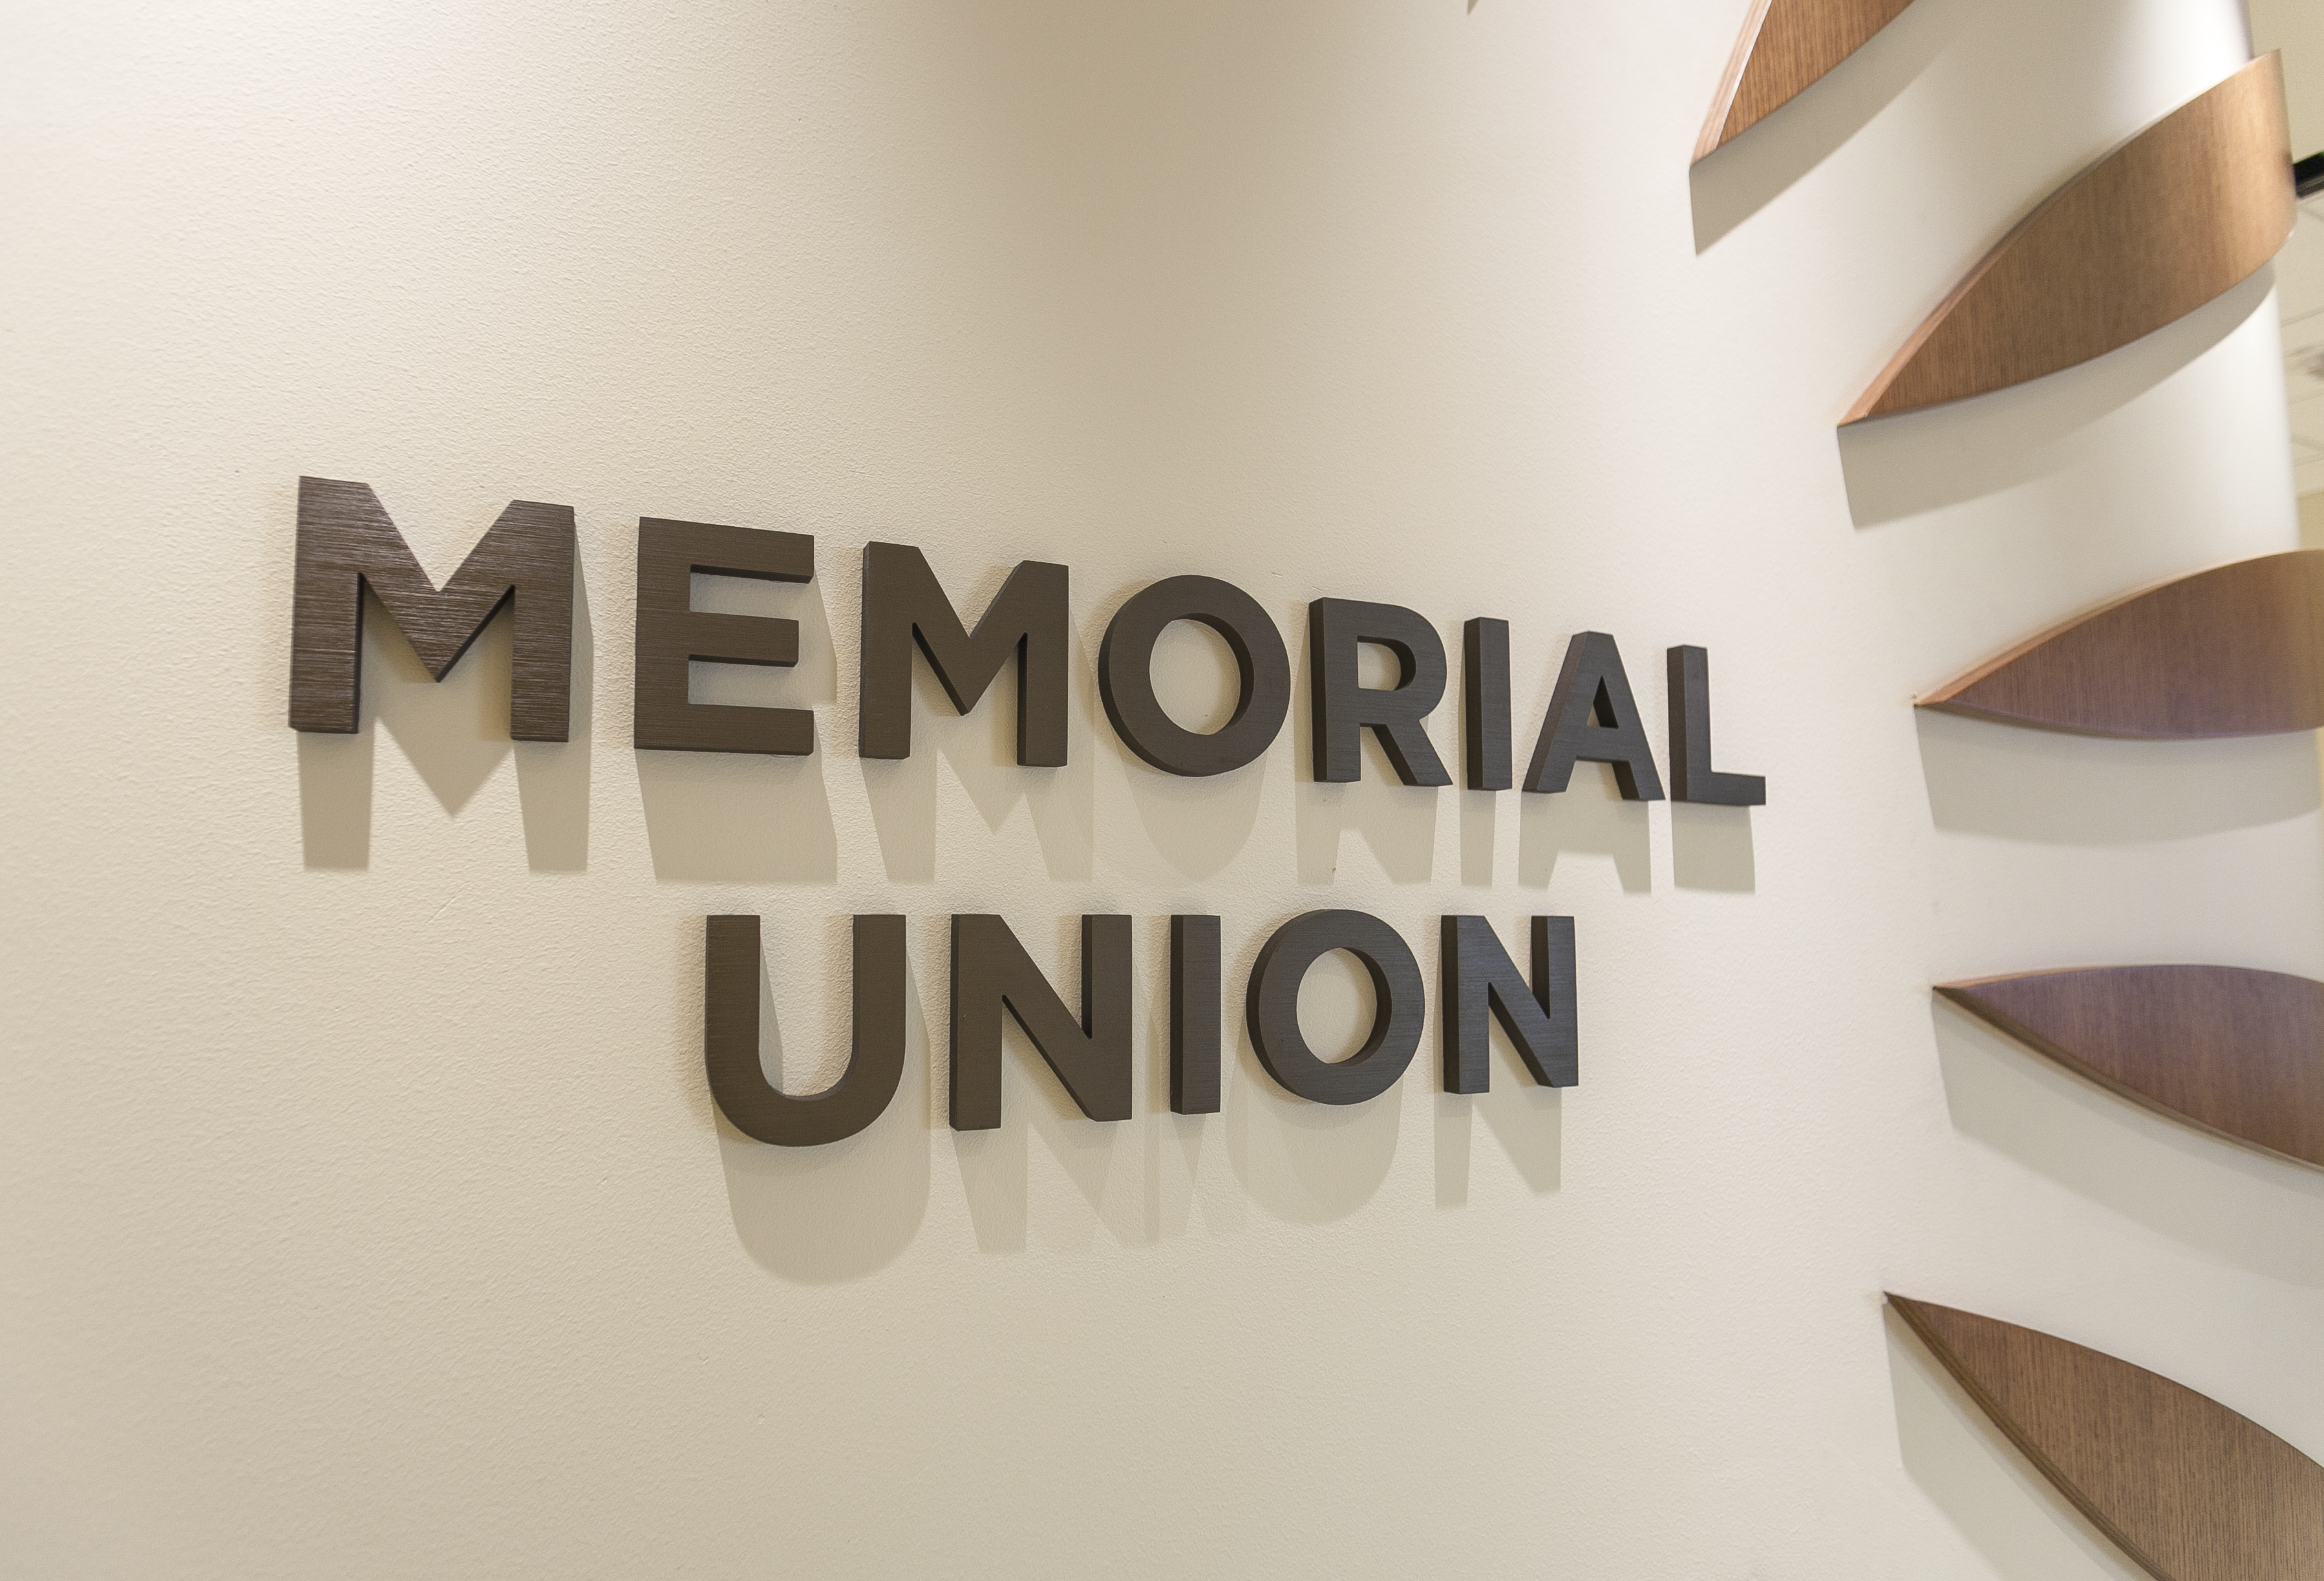 Photos of the remodeled Memorial Union, photographed November 4, 2016. photos by Brian Ebner/Optic Nerve